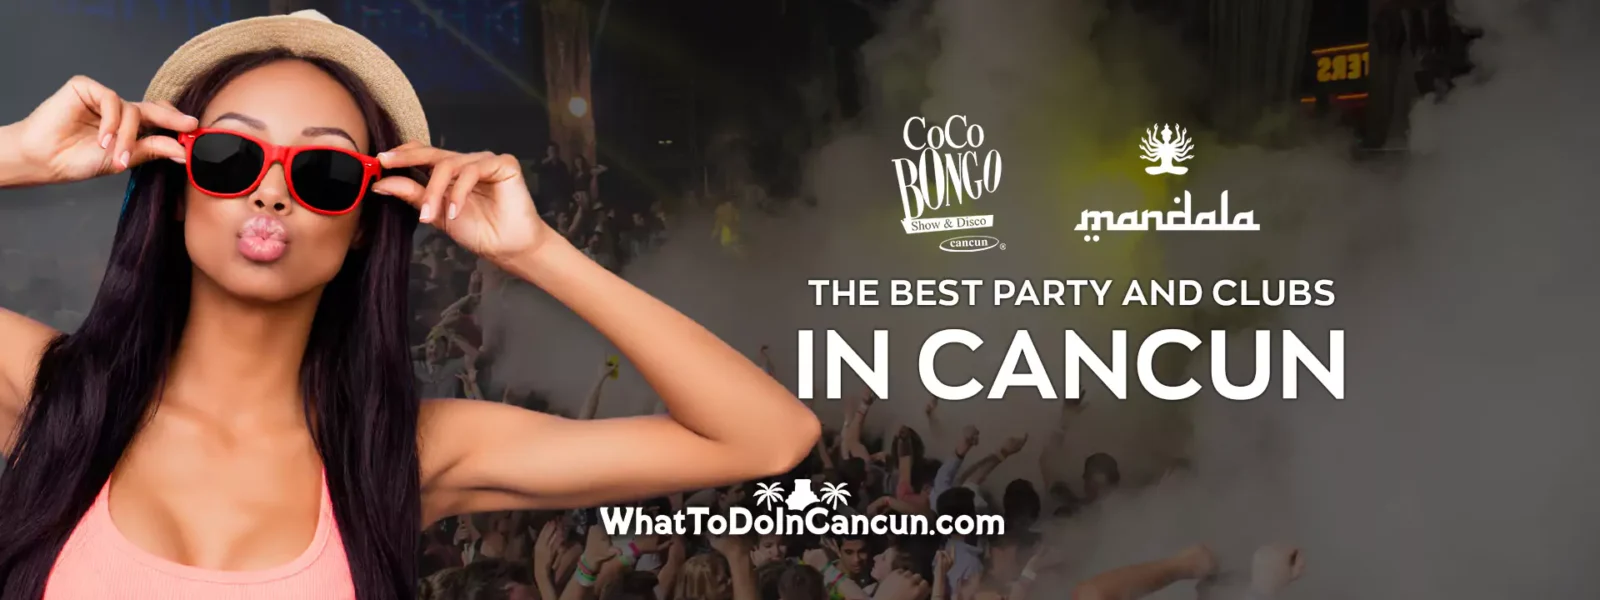 the-best-party-and-clubs-in-cancun